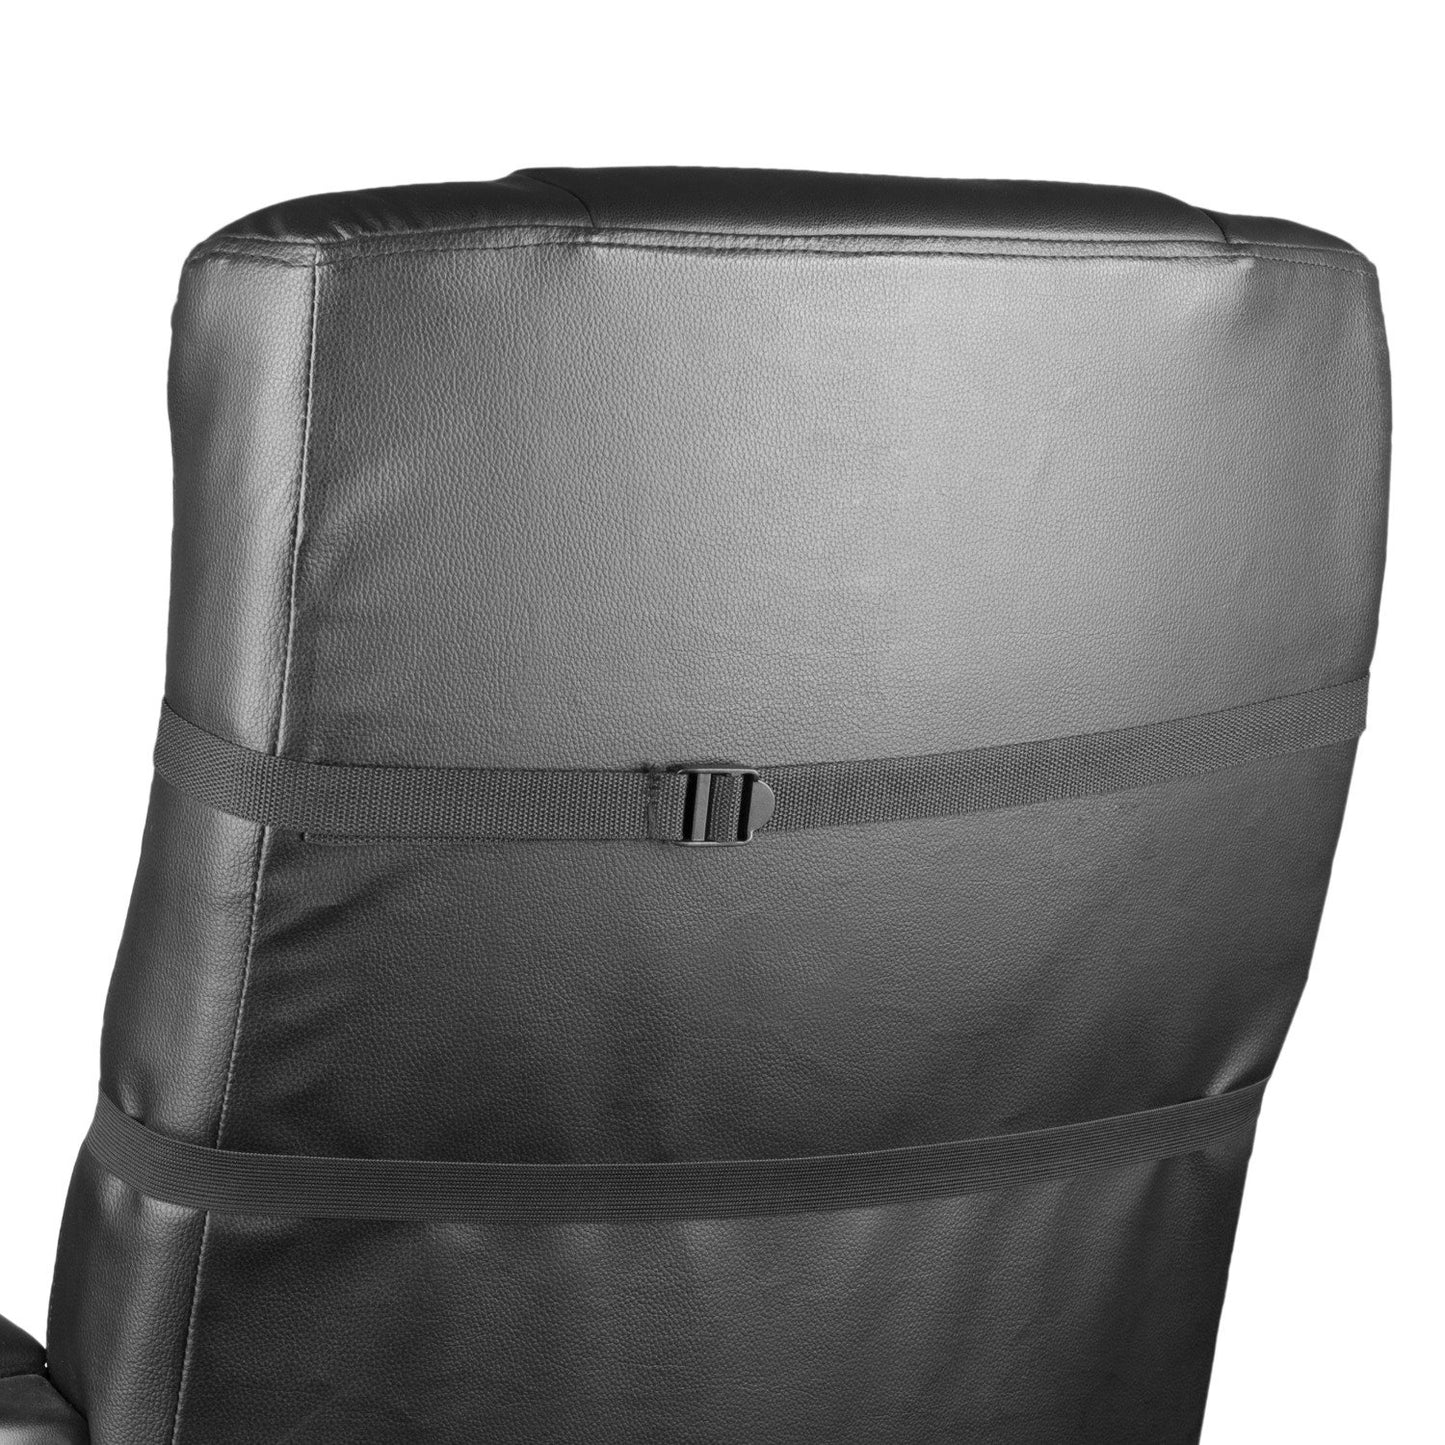 Wagan Tech 9448 12-Volt Deluxe Velour Heated Seat Cushion™